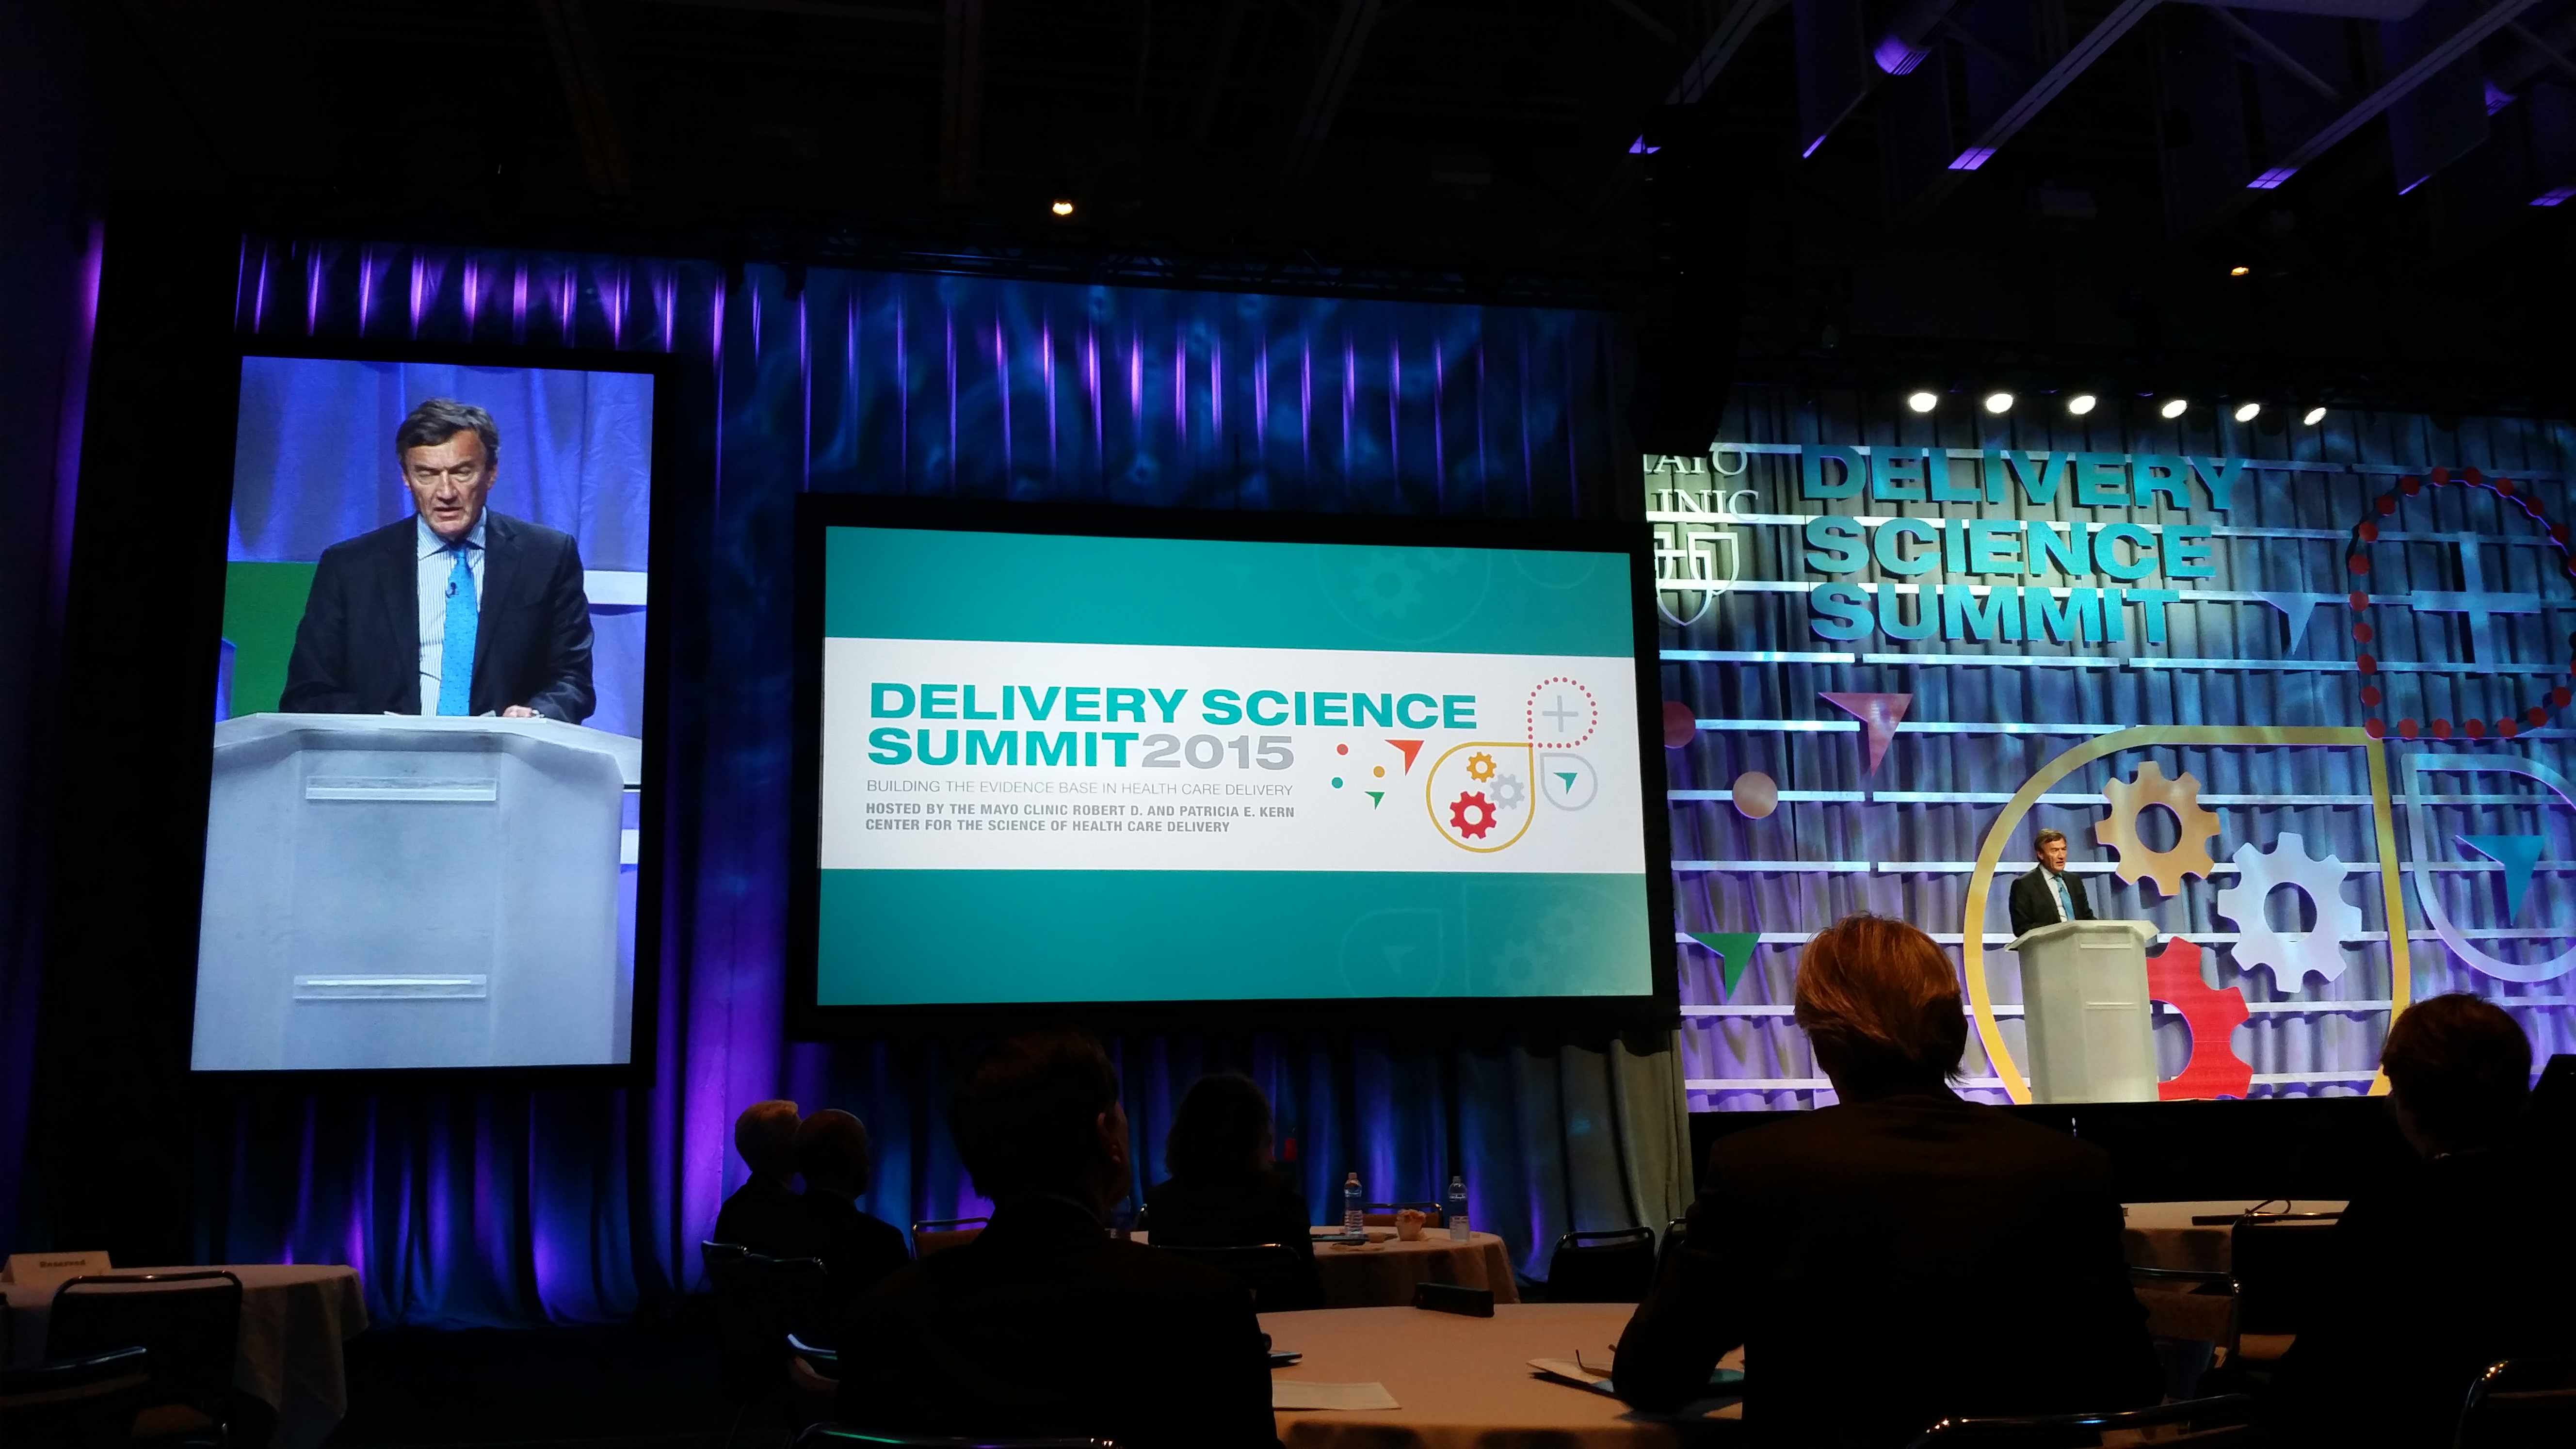 Dr. John Noseworthy addressing the Delivery Science Summit 2015, Center for the Science of Health Care Delivery